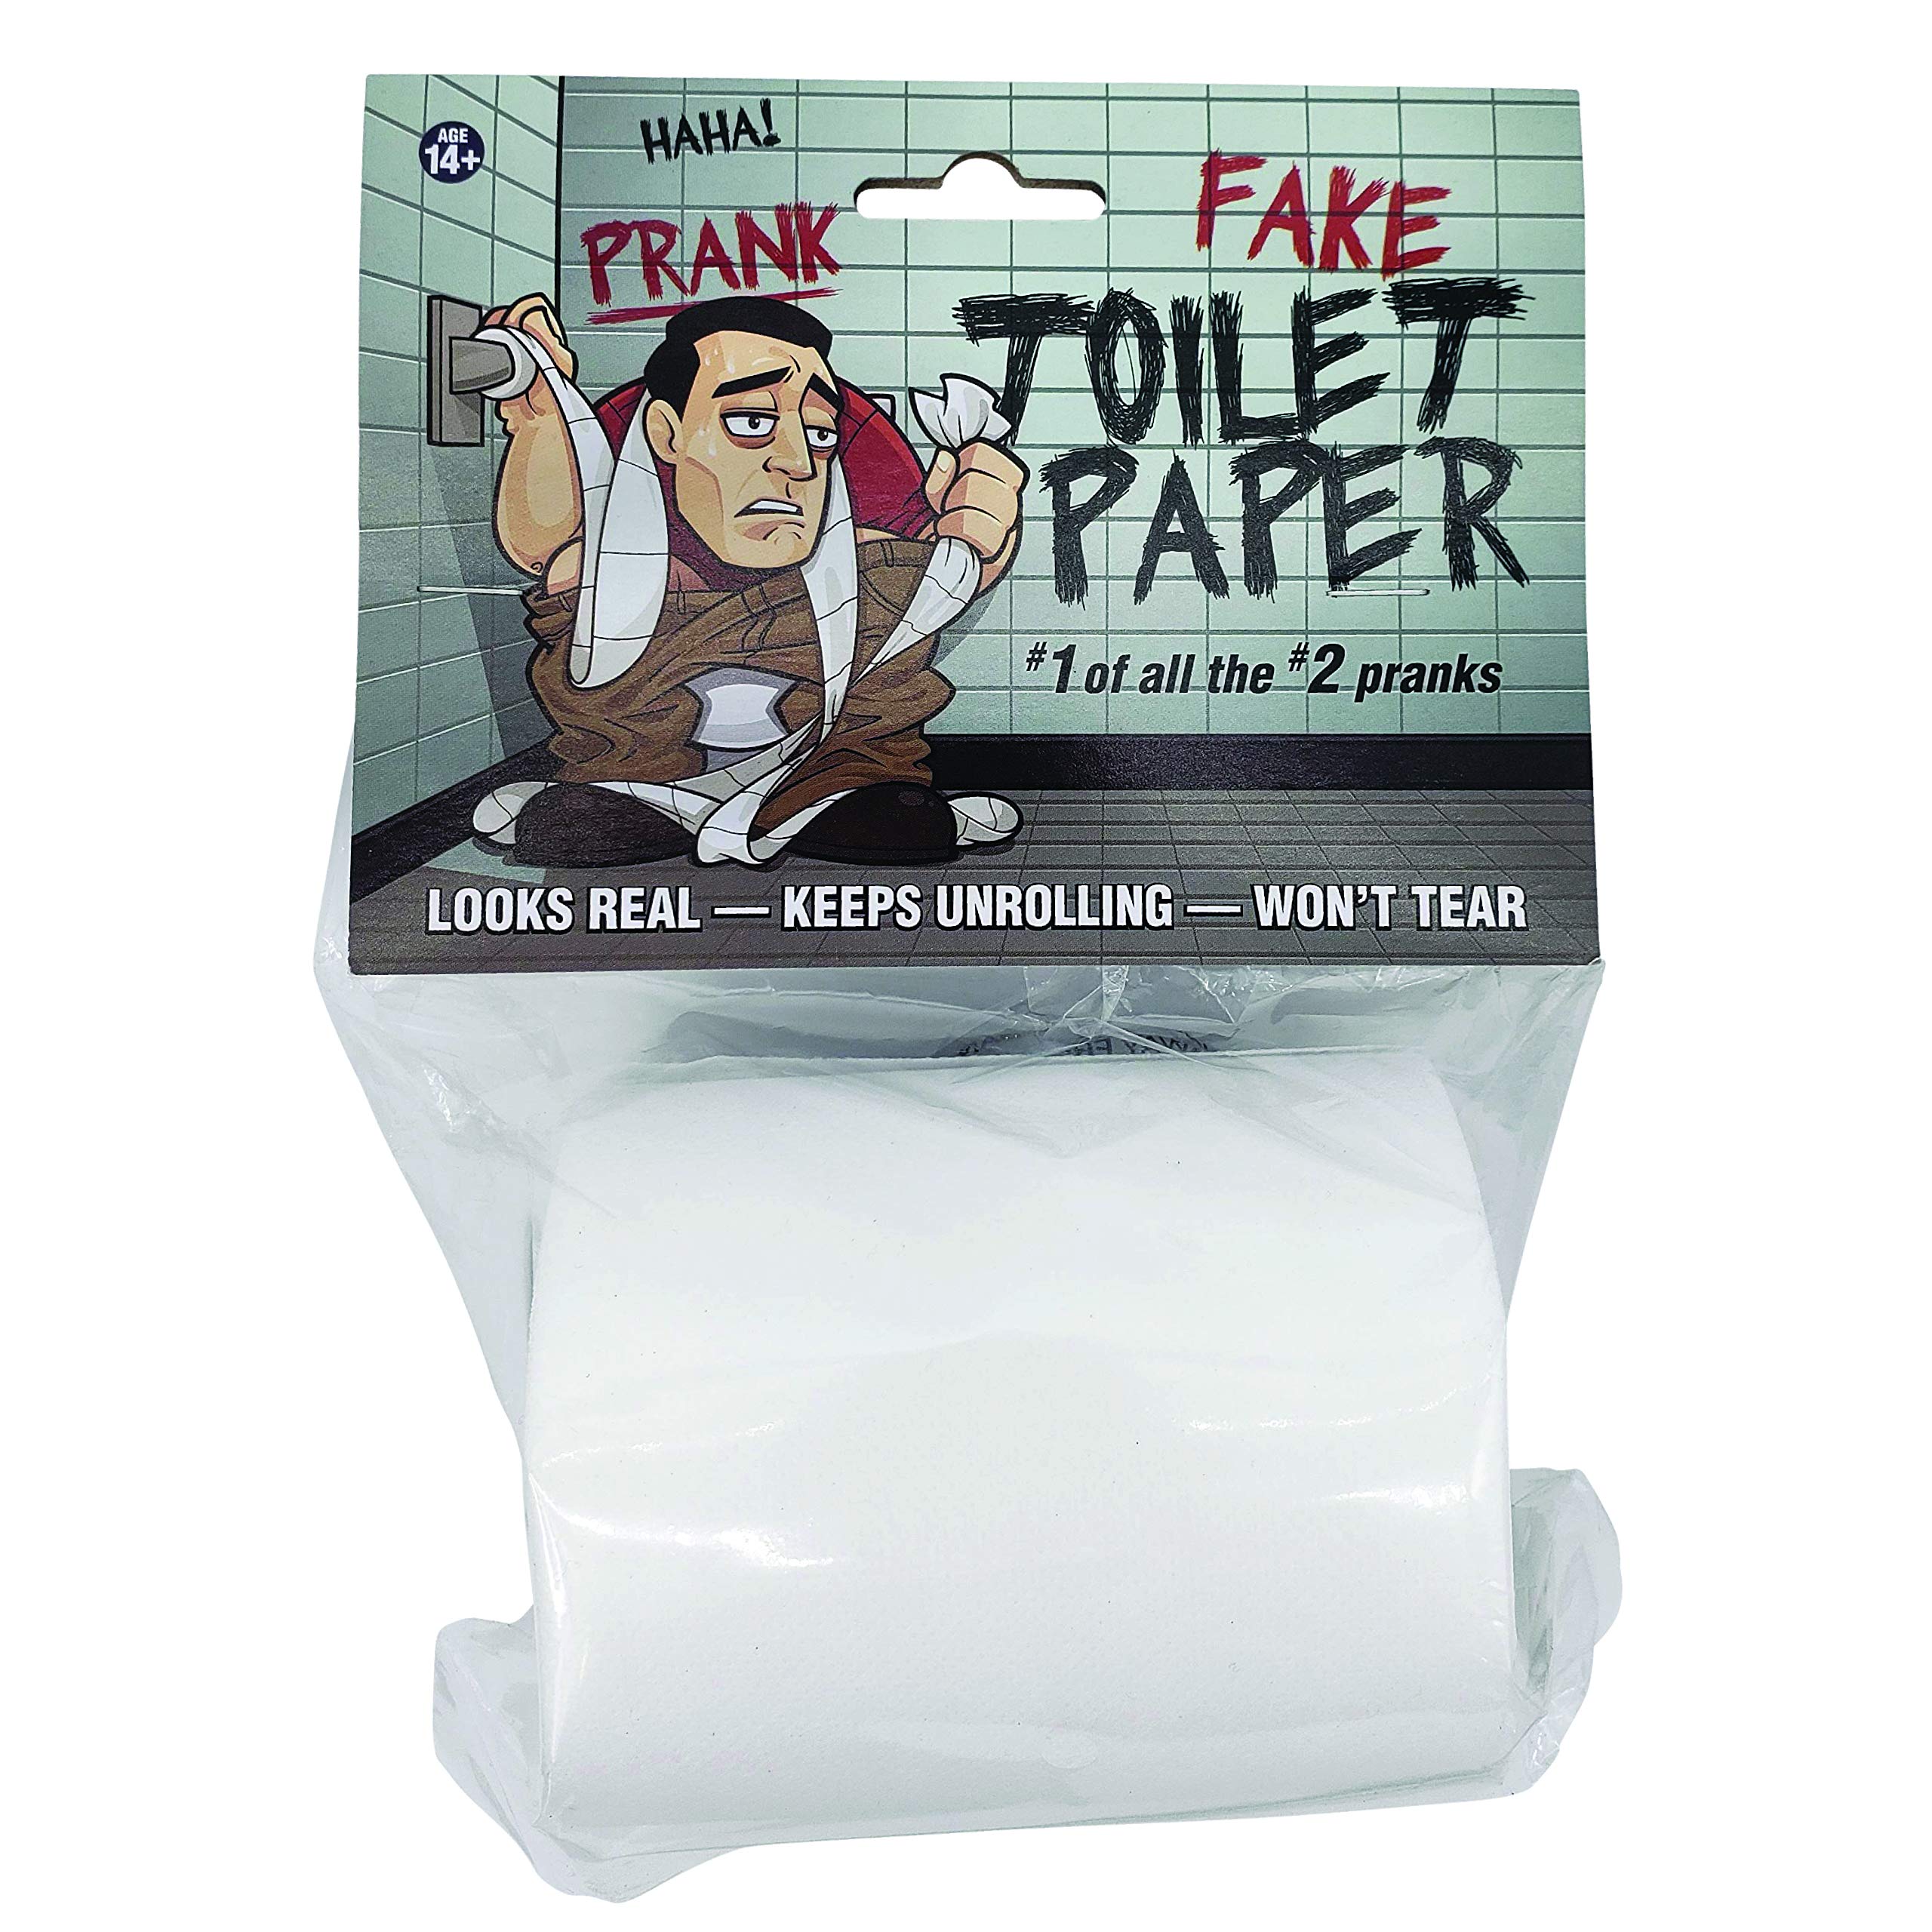 Mua 'No Tear' Funny Prank Toilet Paper - Impossible to Rip -Fake Novelty  Stuff for Adults and Kids - Gag Non Rip Paper - Hilarious and Shocking Joke  that will have your